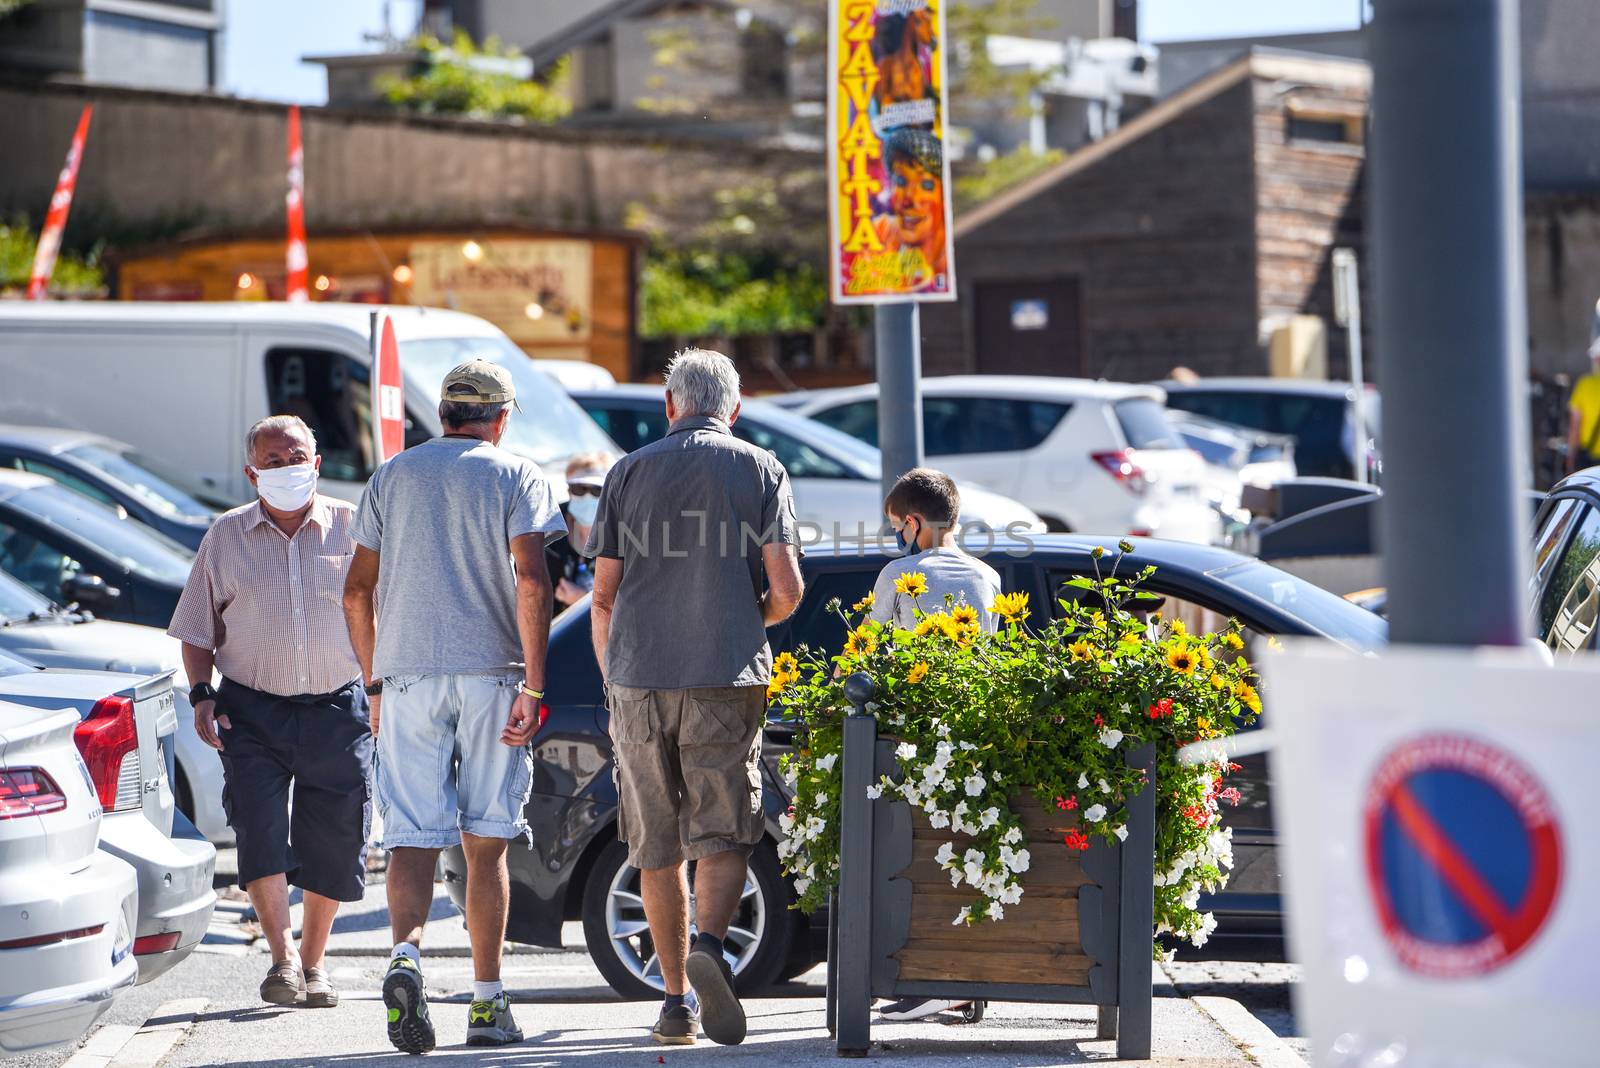 Les Angles, France : 2020 July 19 : People walk in summer on Les Angles ski resort city in Sunny day.  les Angles, France.